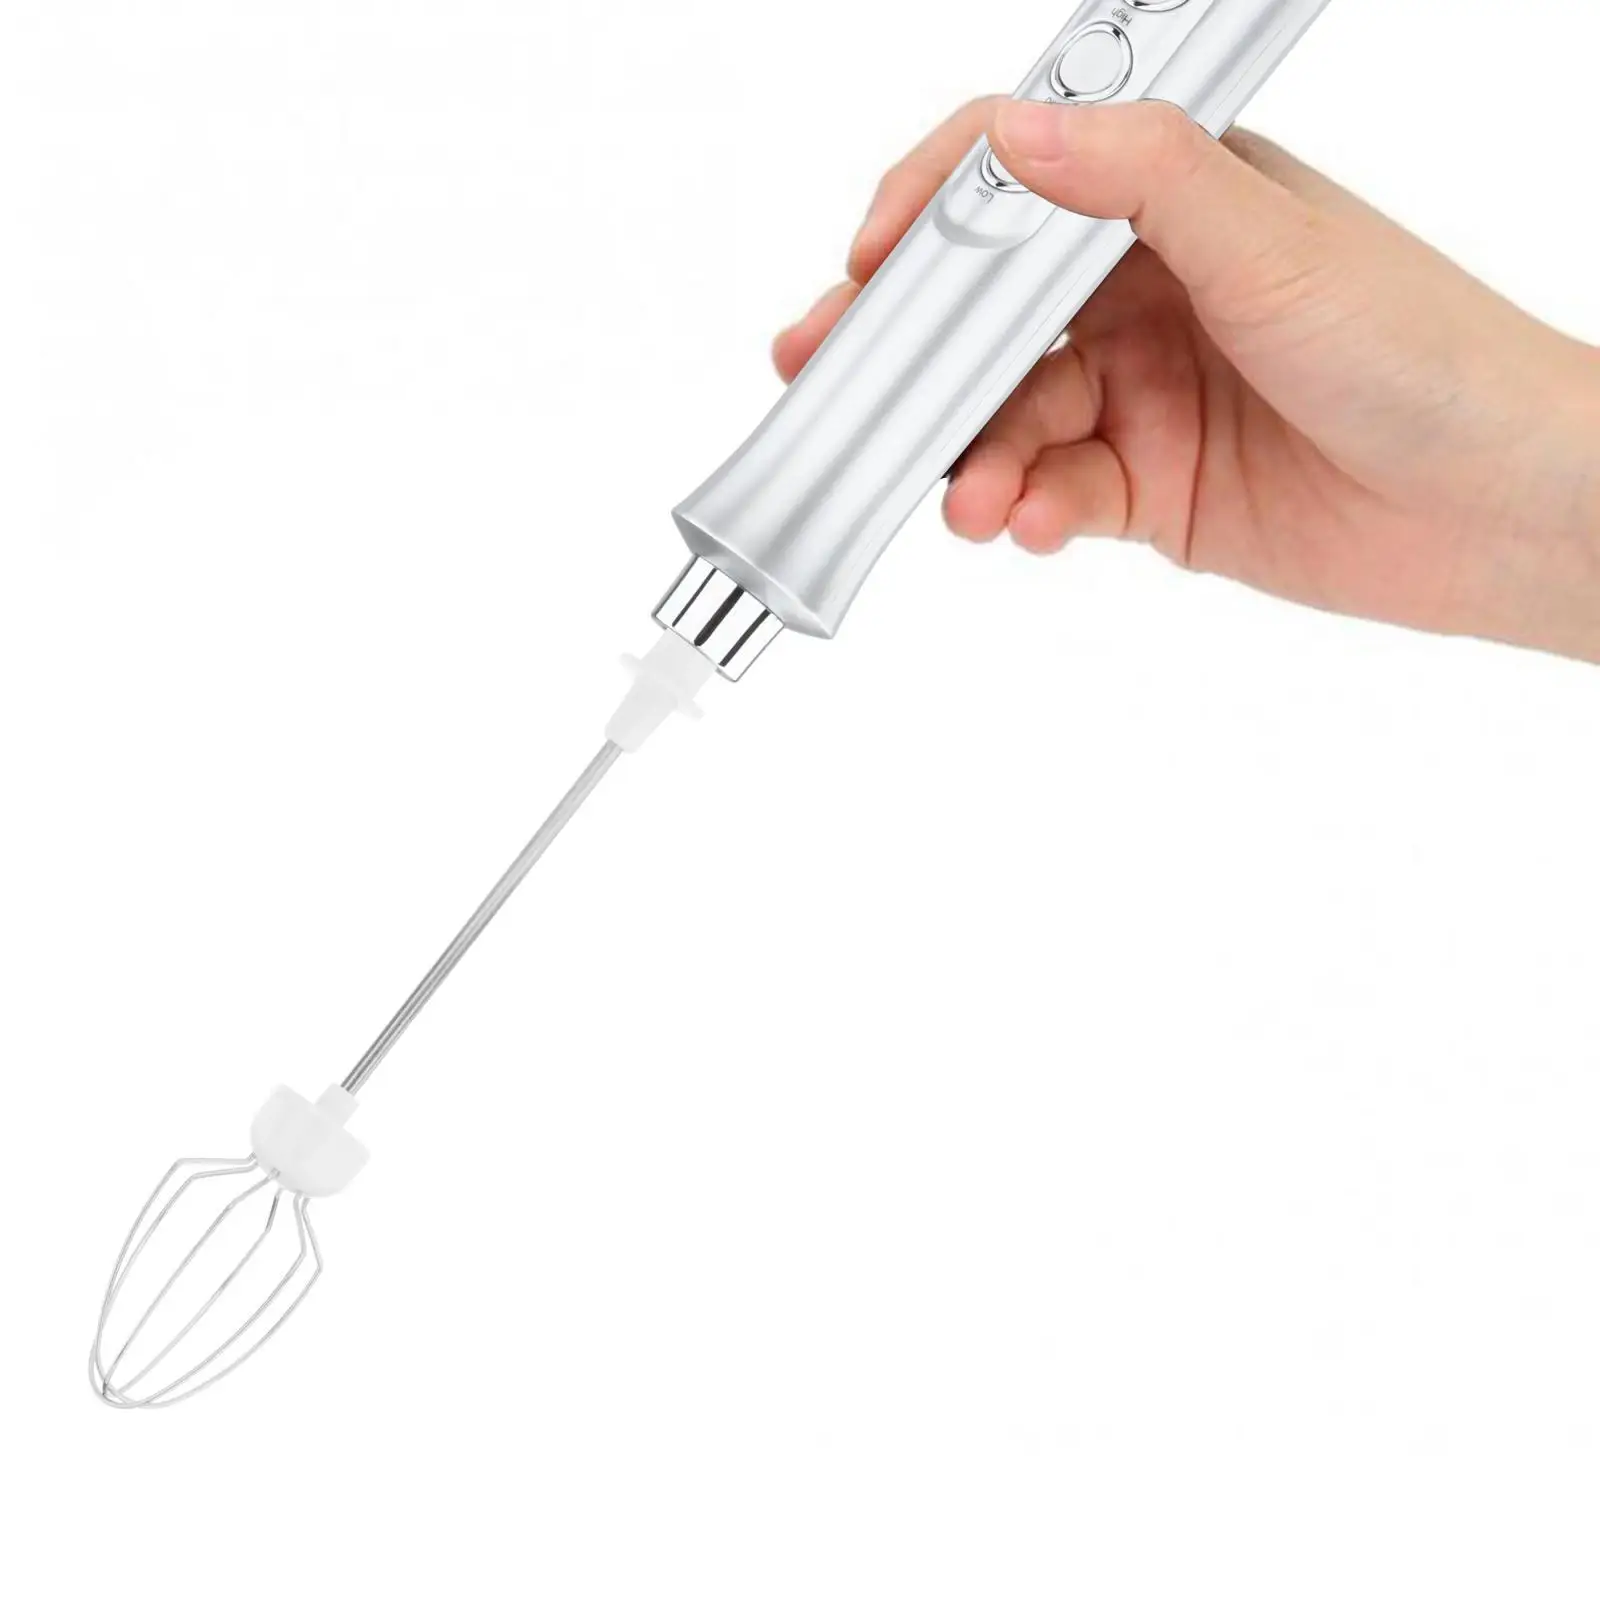  Milk Frother USB Rechargeable Handheld 3 Heads 3 Speeds Adjustable Egg Beater for Latte Beverage Coffee